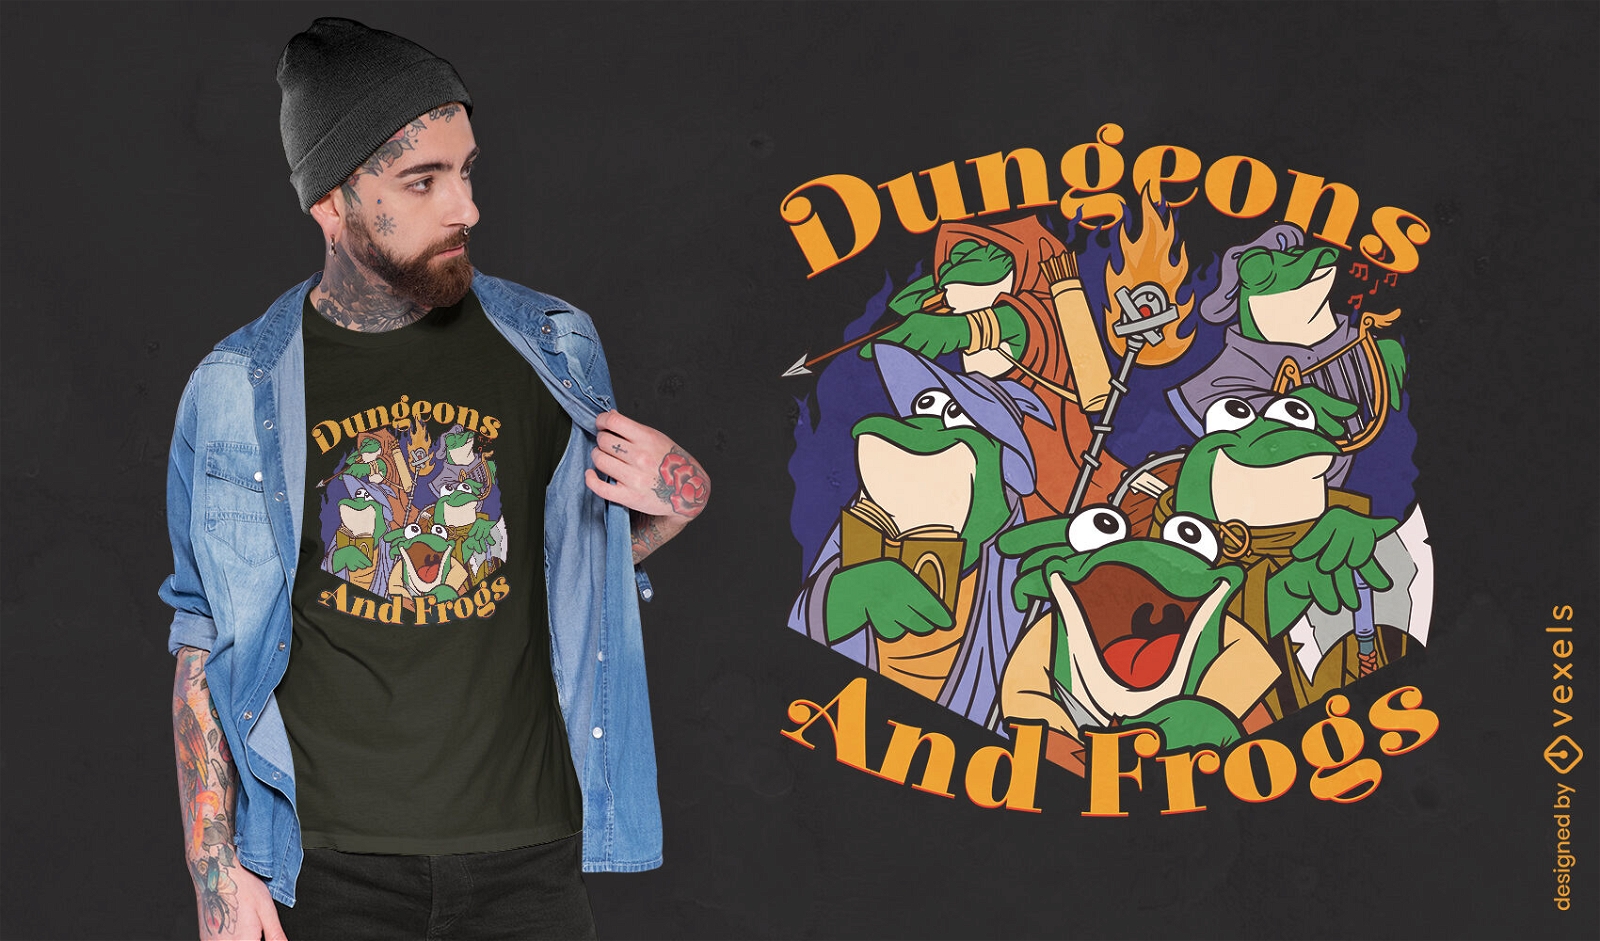 Dungeons and frogs t-shirt design